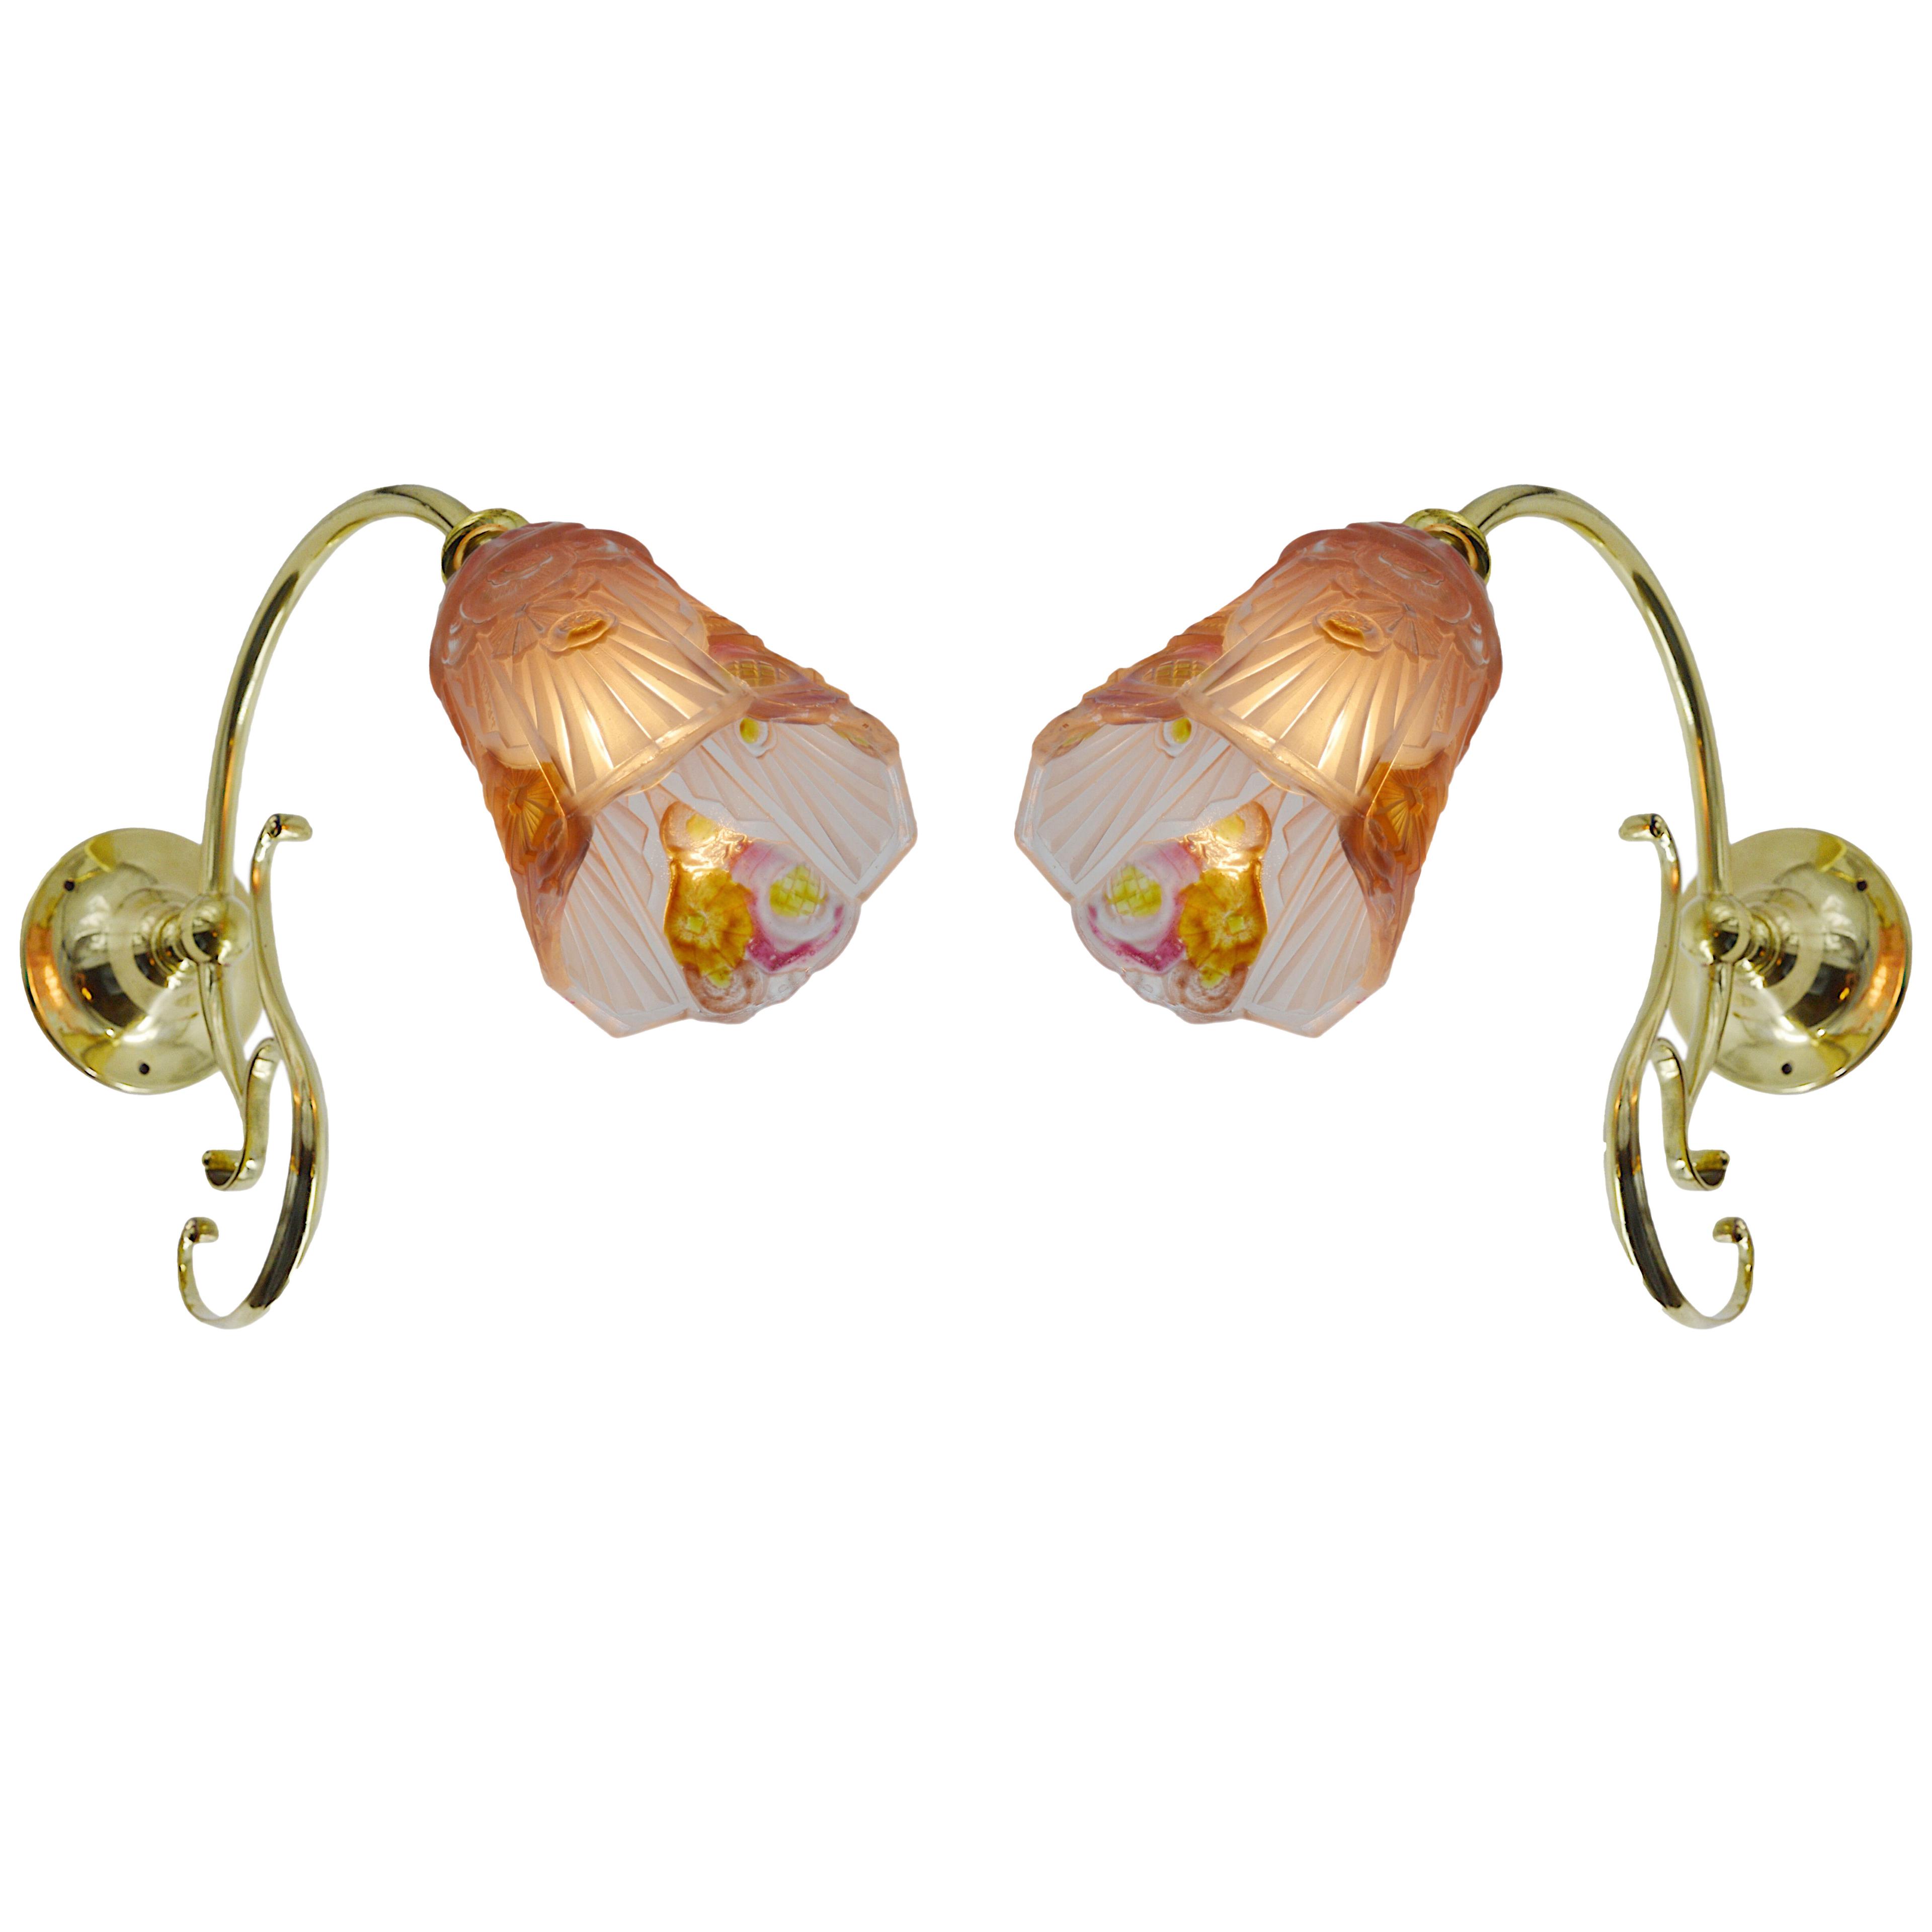 Jean GAUTHIER French Art Deco Pair of Enameled Wall Sconces, 1920s